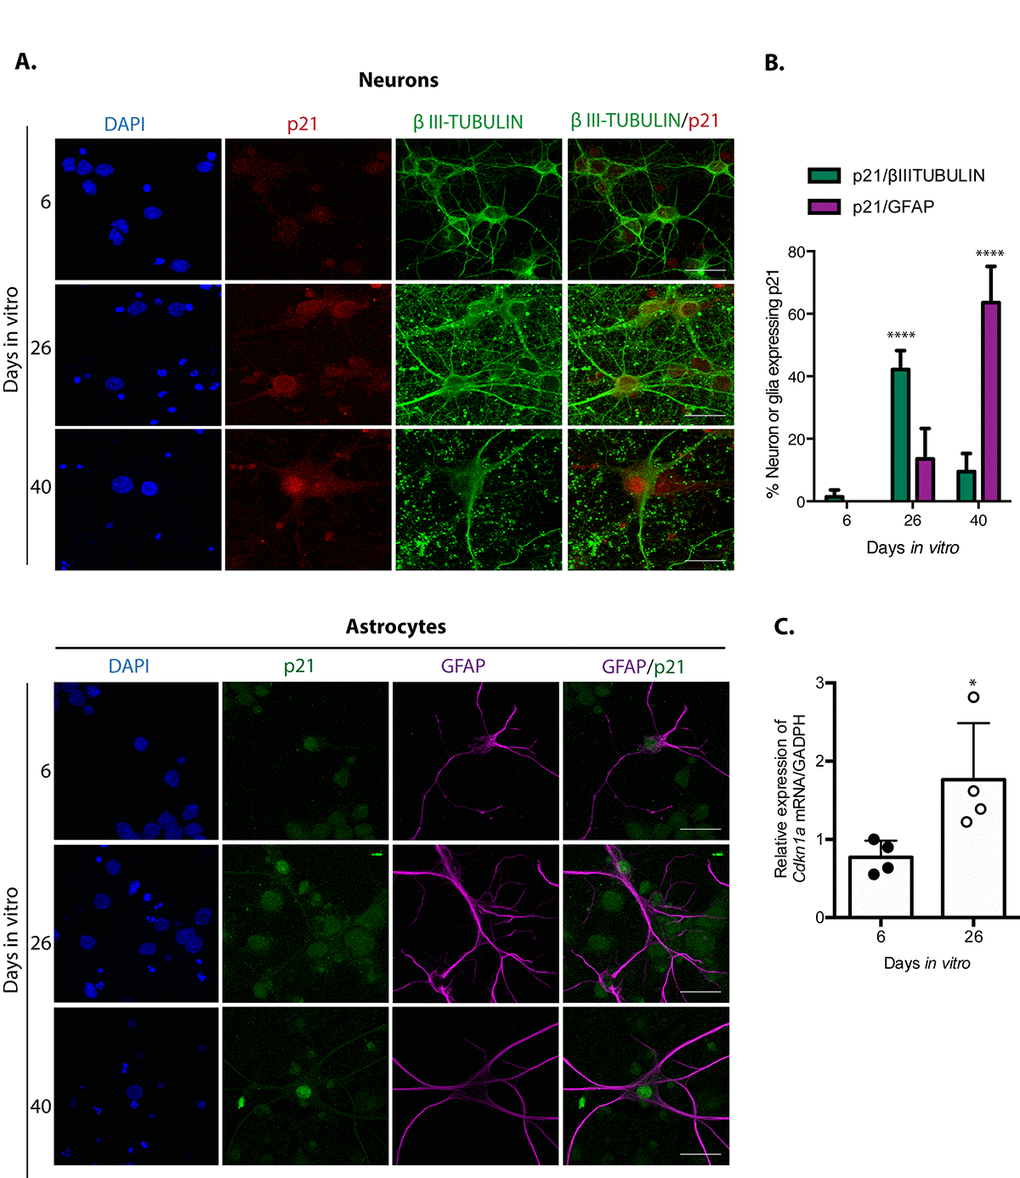 Neuronal cells in cortical long-term culture showed increased expression of p21CIP1/WAF1. (A) Immunofluorescence to detect p21CIP1/WAF1 (p21) in neurons (expressing βIII-TUBULIN) or astrocytes (expressing GFAP) in primary culture of cortical cells incubated during the indicated DIV. Notice that mostly neurons increased the abundance of p21CIP1/WAF1 at 26 DIV, indicating that neurons acquired senescent features before glial cells. Scale bar represents 25 μm. Arrows indicate examples of cells with healthy nuclei counted (not all the healthy cells are indicated). (B) Percentage of neurons or glial cells expressing p21CIP1/WAF1 over all cells. The mean of three independent experiments, each done by duplicate, is plotted. Bars represent standard deviation. Two-way RM ANOVA analysis, with Tukey´s multiple comparison test. **** pC) qRT-PCR from total RNA purified from cortical primary cultures during the indicated days. The relative expression of Cdkn1a mRNA was normalized with Gapdh mRNA. Bars represent SD. * p=0.039 by unpaired t test two tailed. n=4.